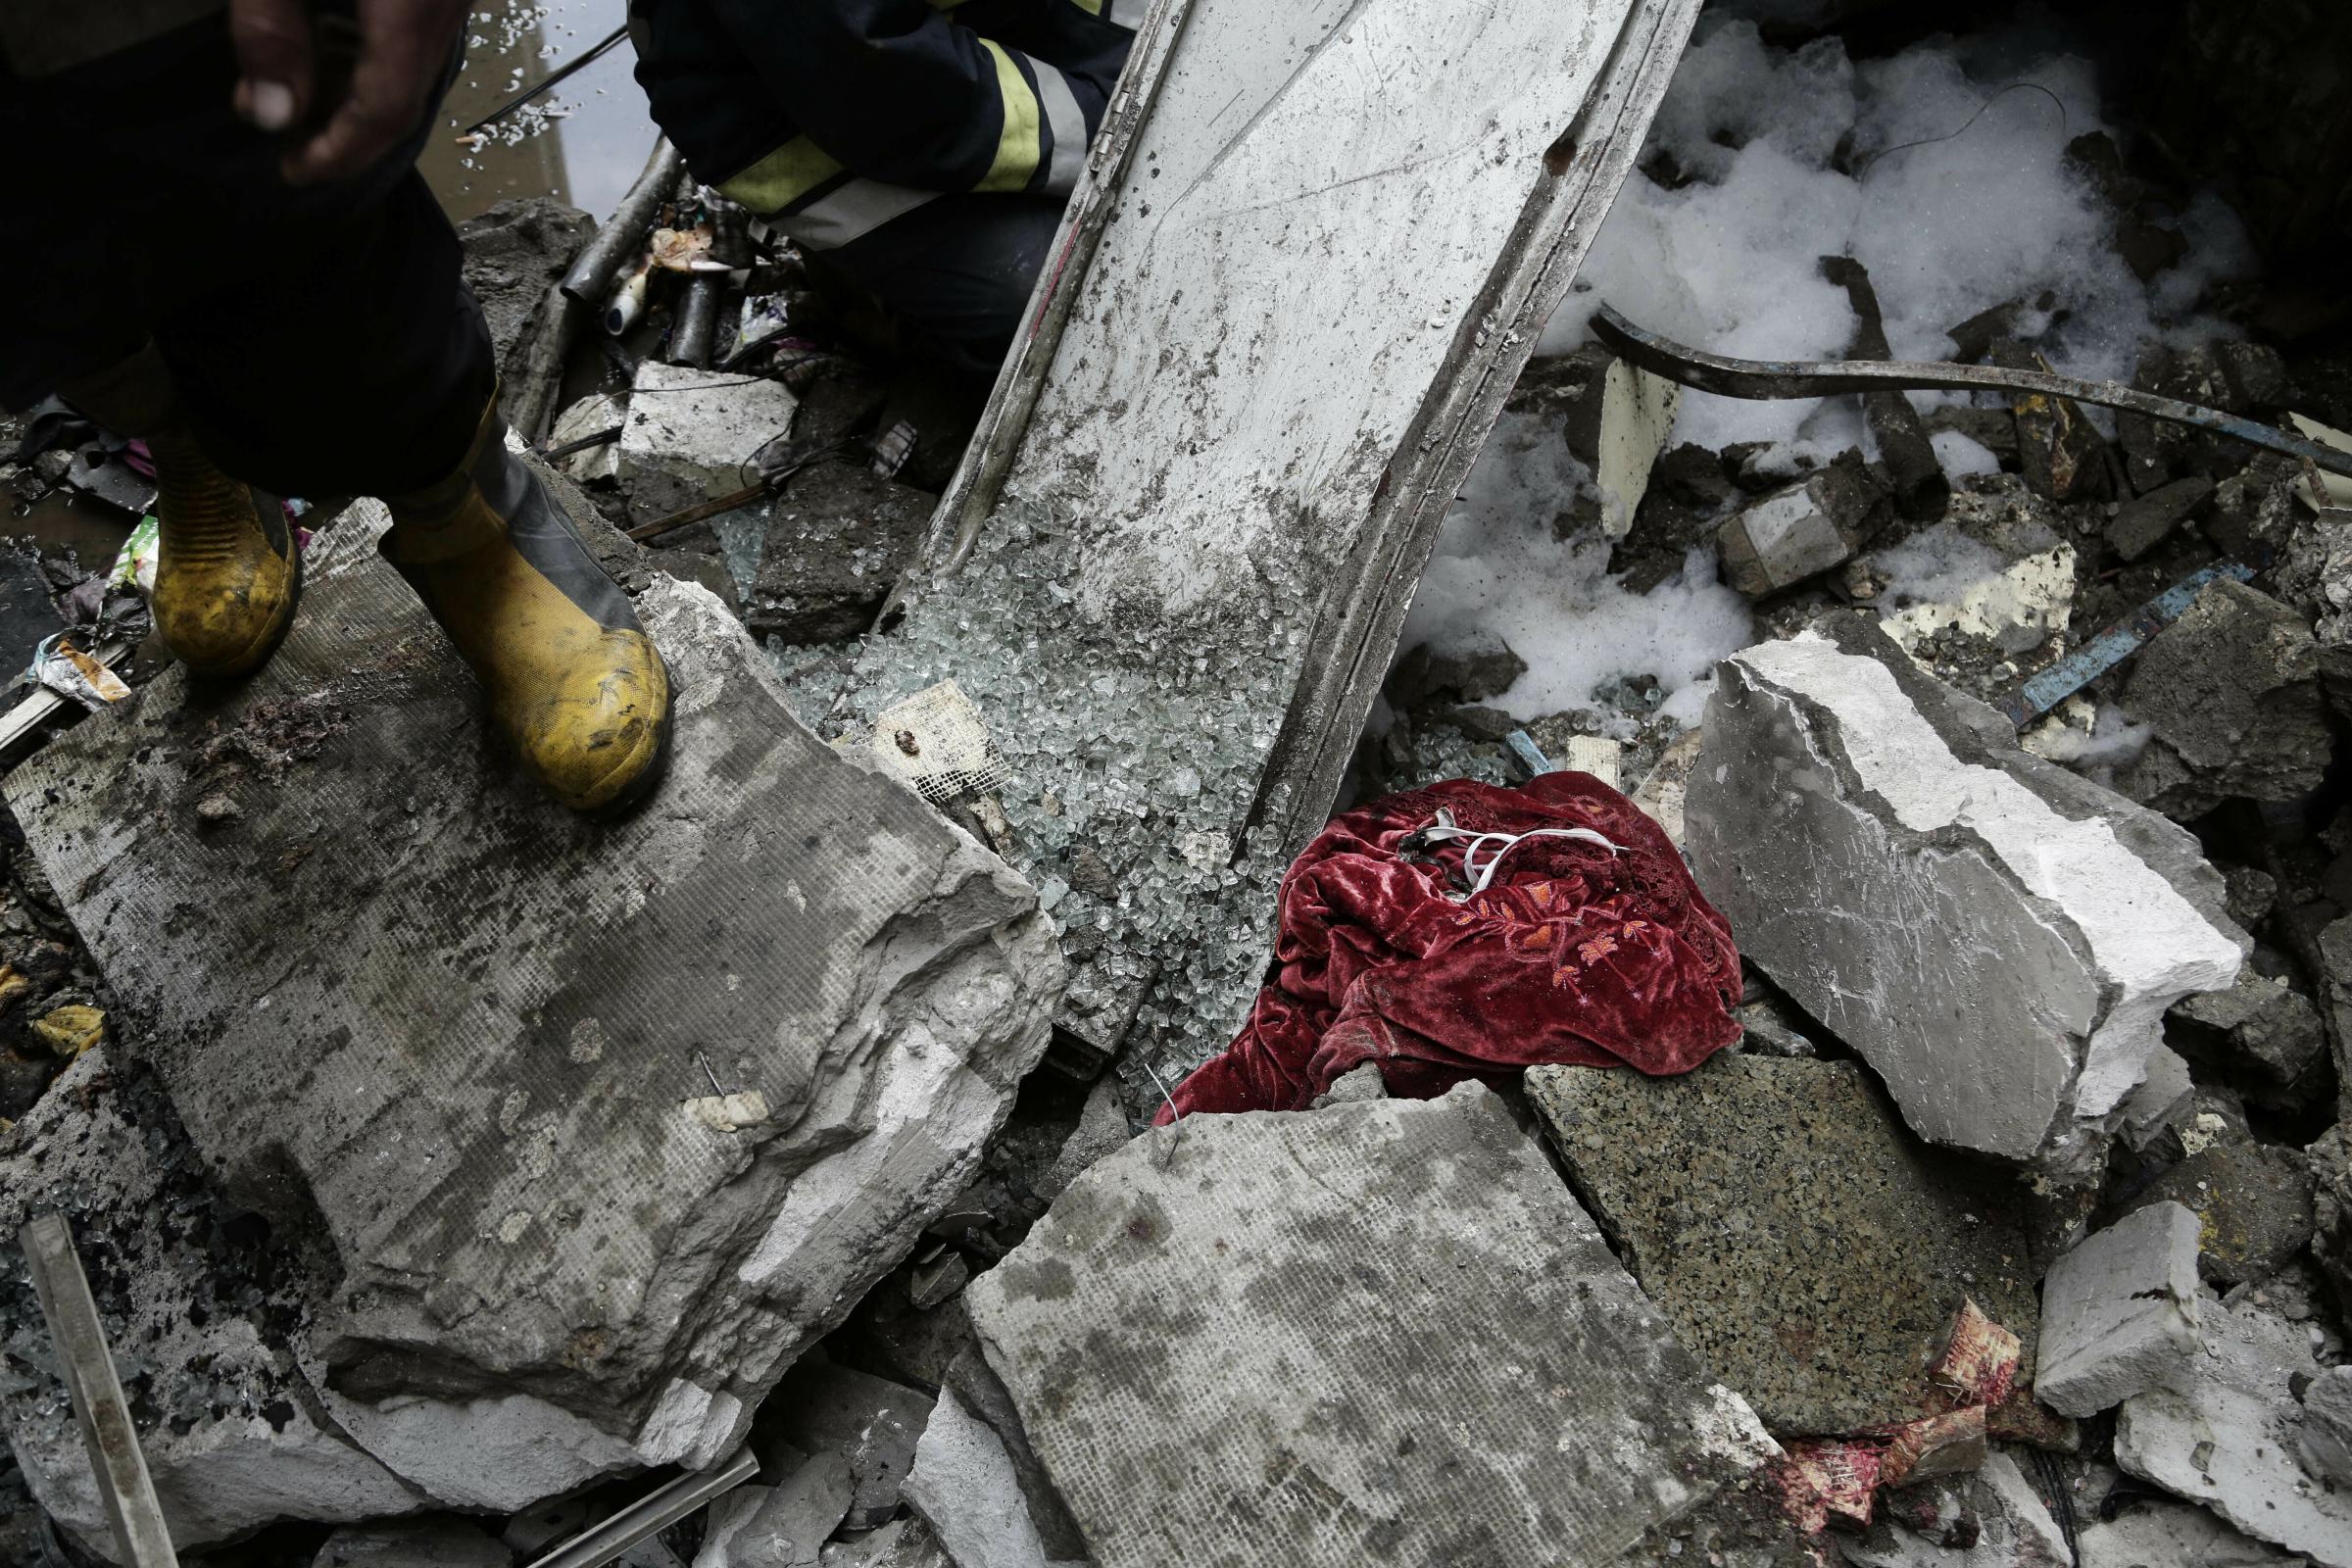  A firefighter stands amid rubble and blood-stained clothes after a train crash inside Ramsis train station. 